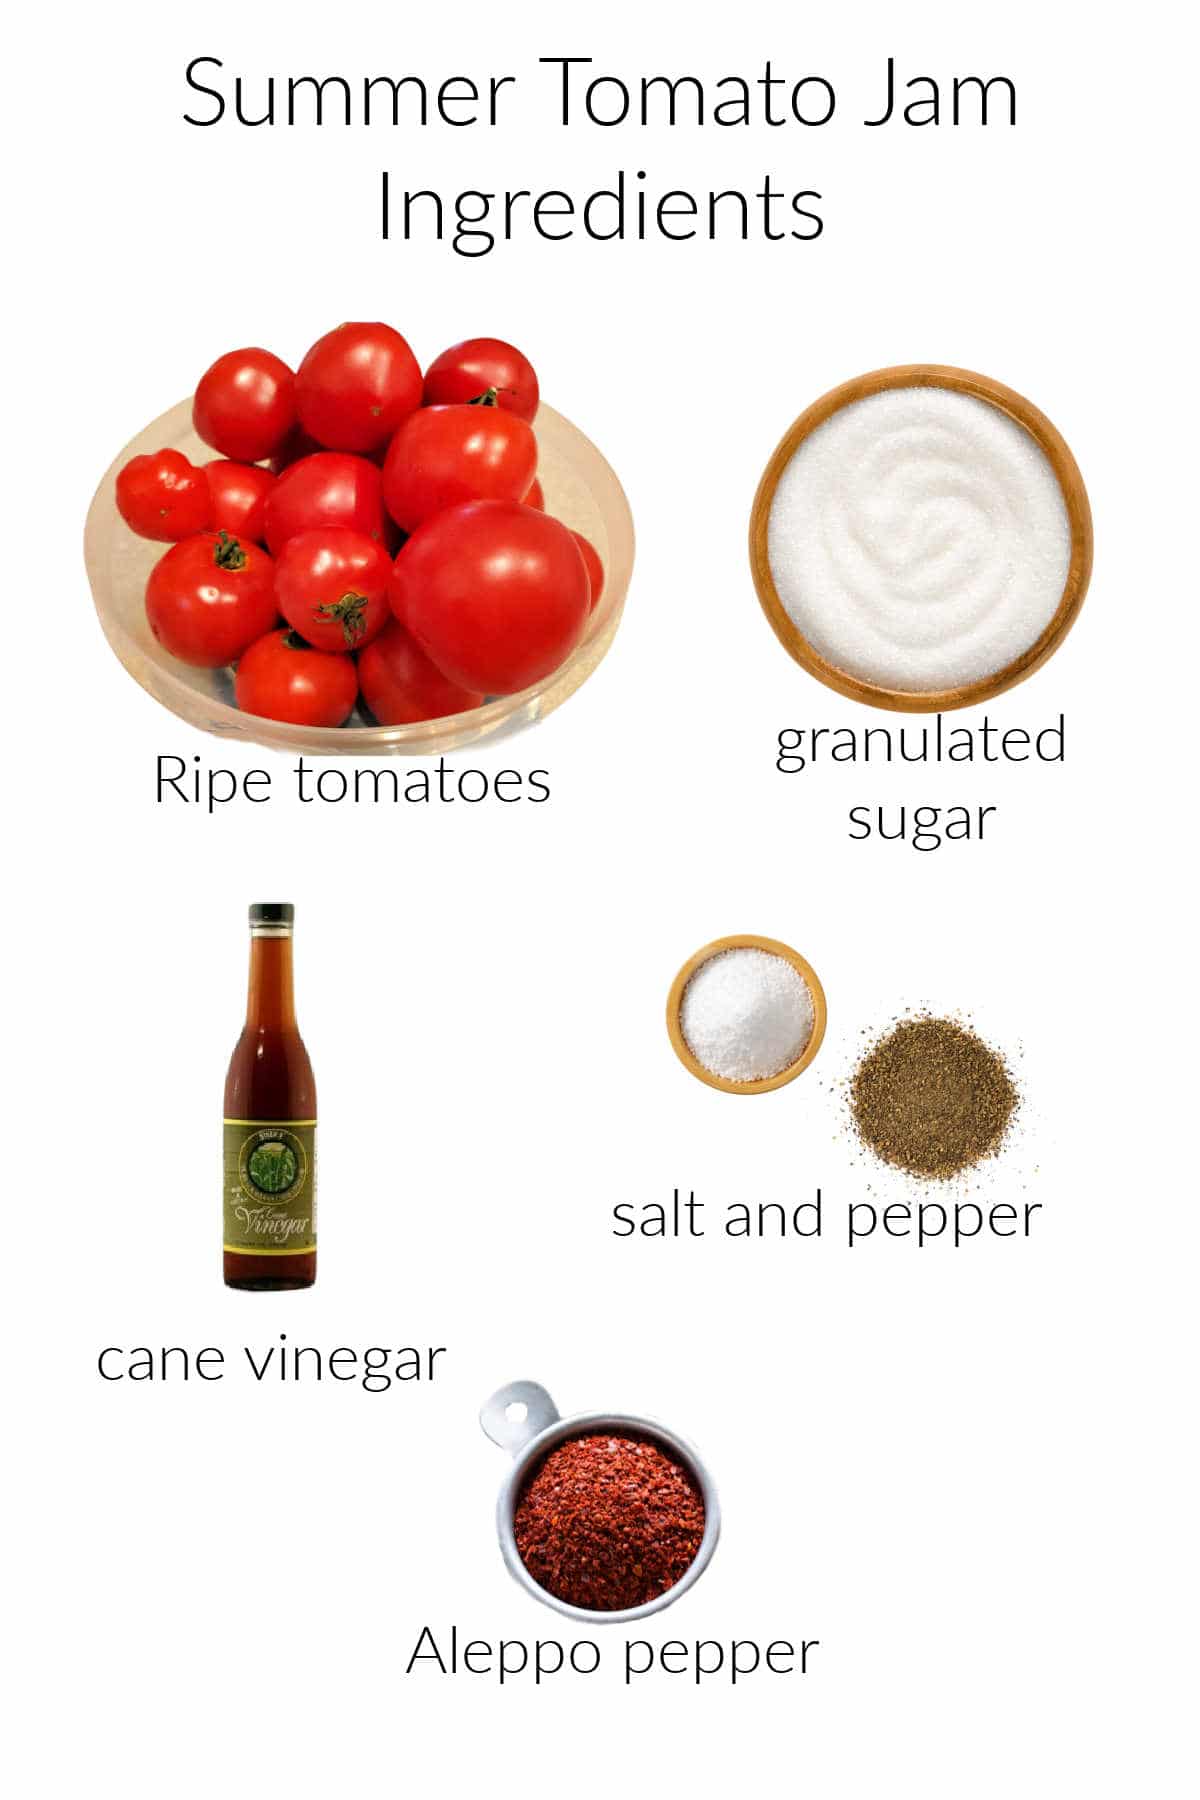 Collage of ingredients for making summer tomato jam: tomatoes, sugar, cane vinegar, salt, pepper, and aleppo pepper.